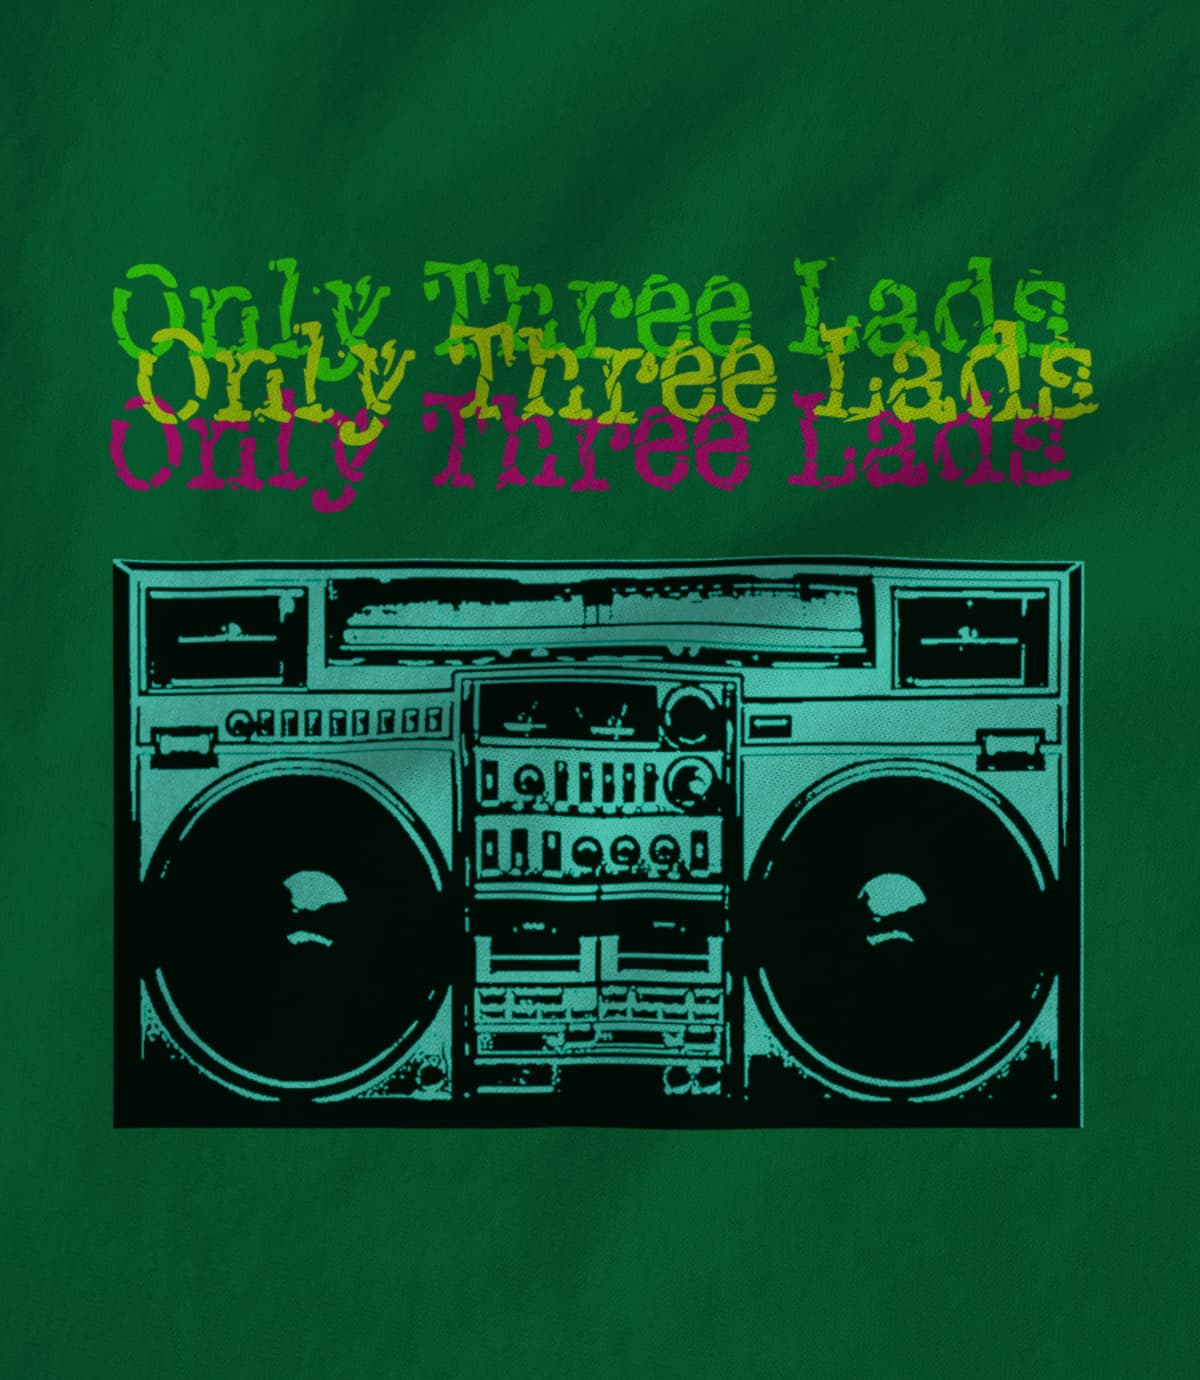 Only three lads o3l   boombox  green  1581058370